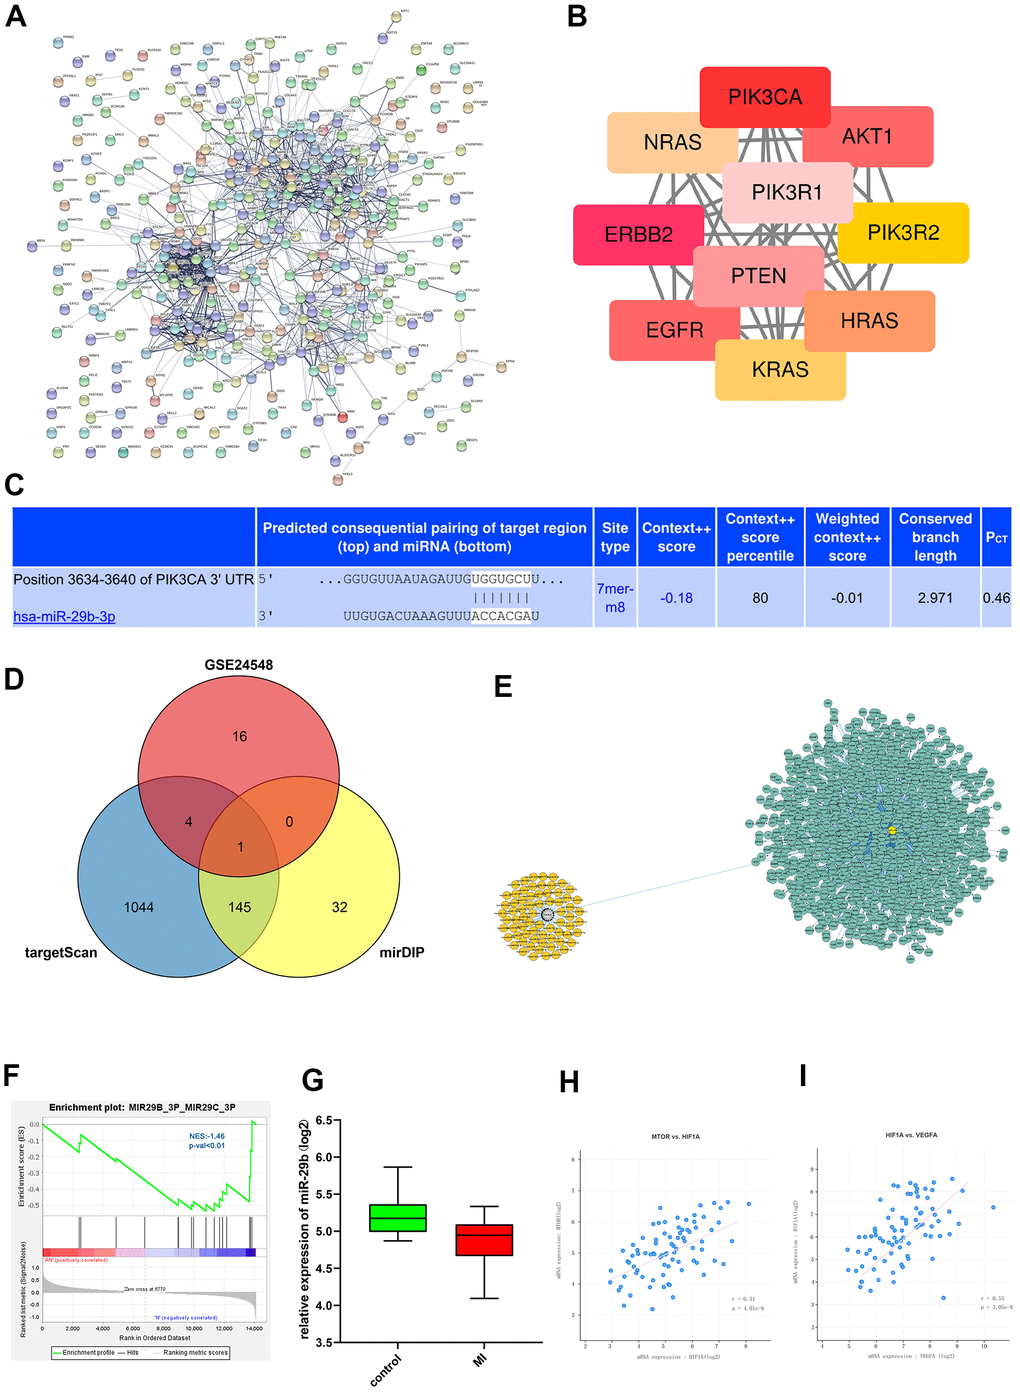 PPI network analysis and miRNA target gene prediction. (A) PPI network of the DEGs. (B) The hub genes identified from the PPI network. (C) The binding sites of mRNAs and miRNAs were plotted. (D) Venn diagram for intersection of DEGs from GSE24548 and GSE76604 showed the miRNAs such as miR-29b. (E) miRNA and mRNA interaction network. (F) Through GSEA, we found that miR-29 was enriched. (G) The expression of miR-29 was lower in MI group. (H, I) Correlation analyses between mTOR and HIF-1α and between HIF-1α and VEGF indicated that HIF-1α was positively correlated with mTOR and VEGF, respectively.